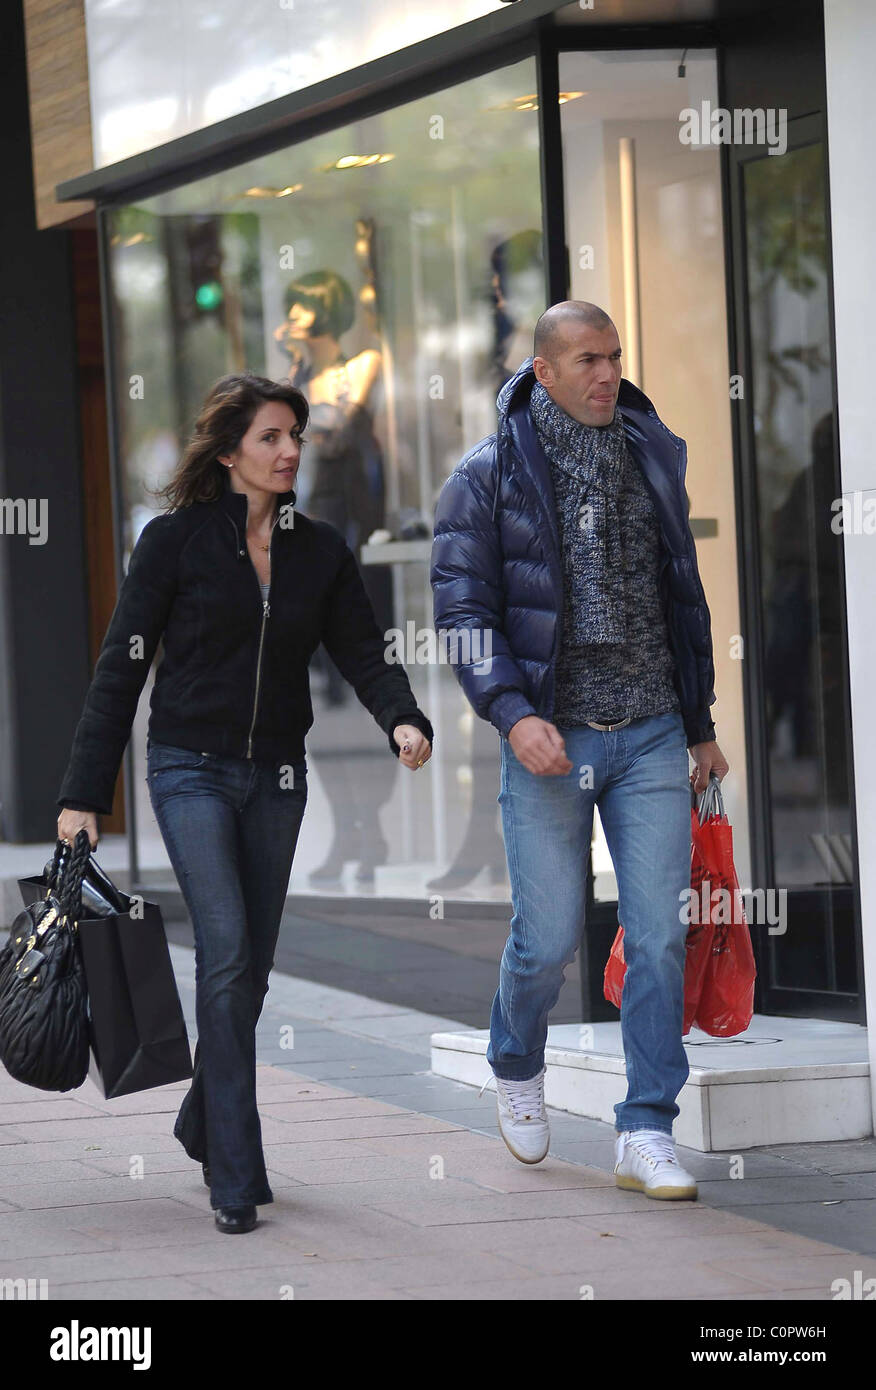 Zinedine Zidane Out shopping with his wife Veronique Zidane Madrid, Spain -  11.11.08 Stock Photo - Alamy